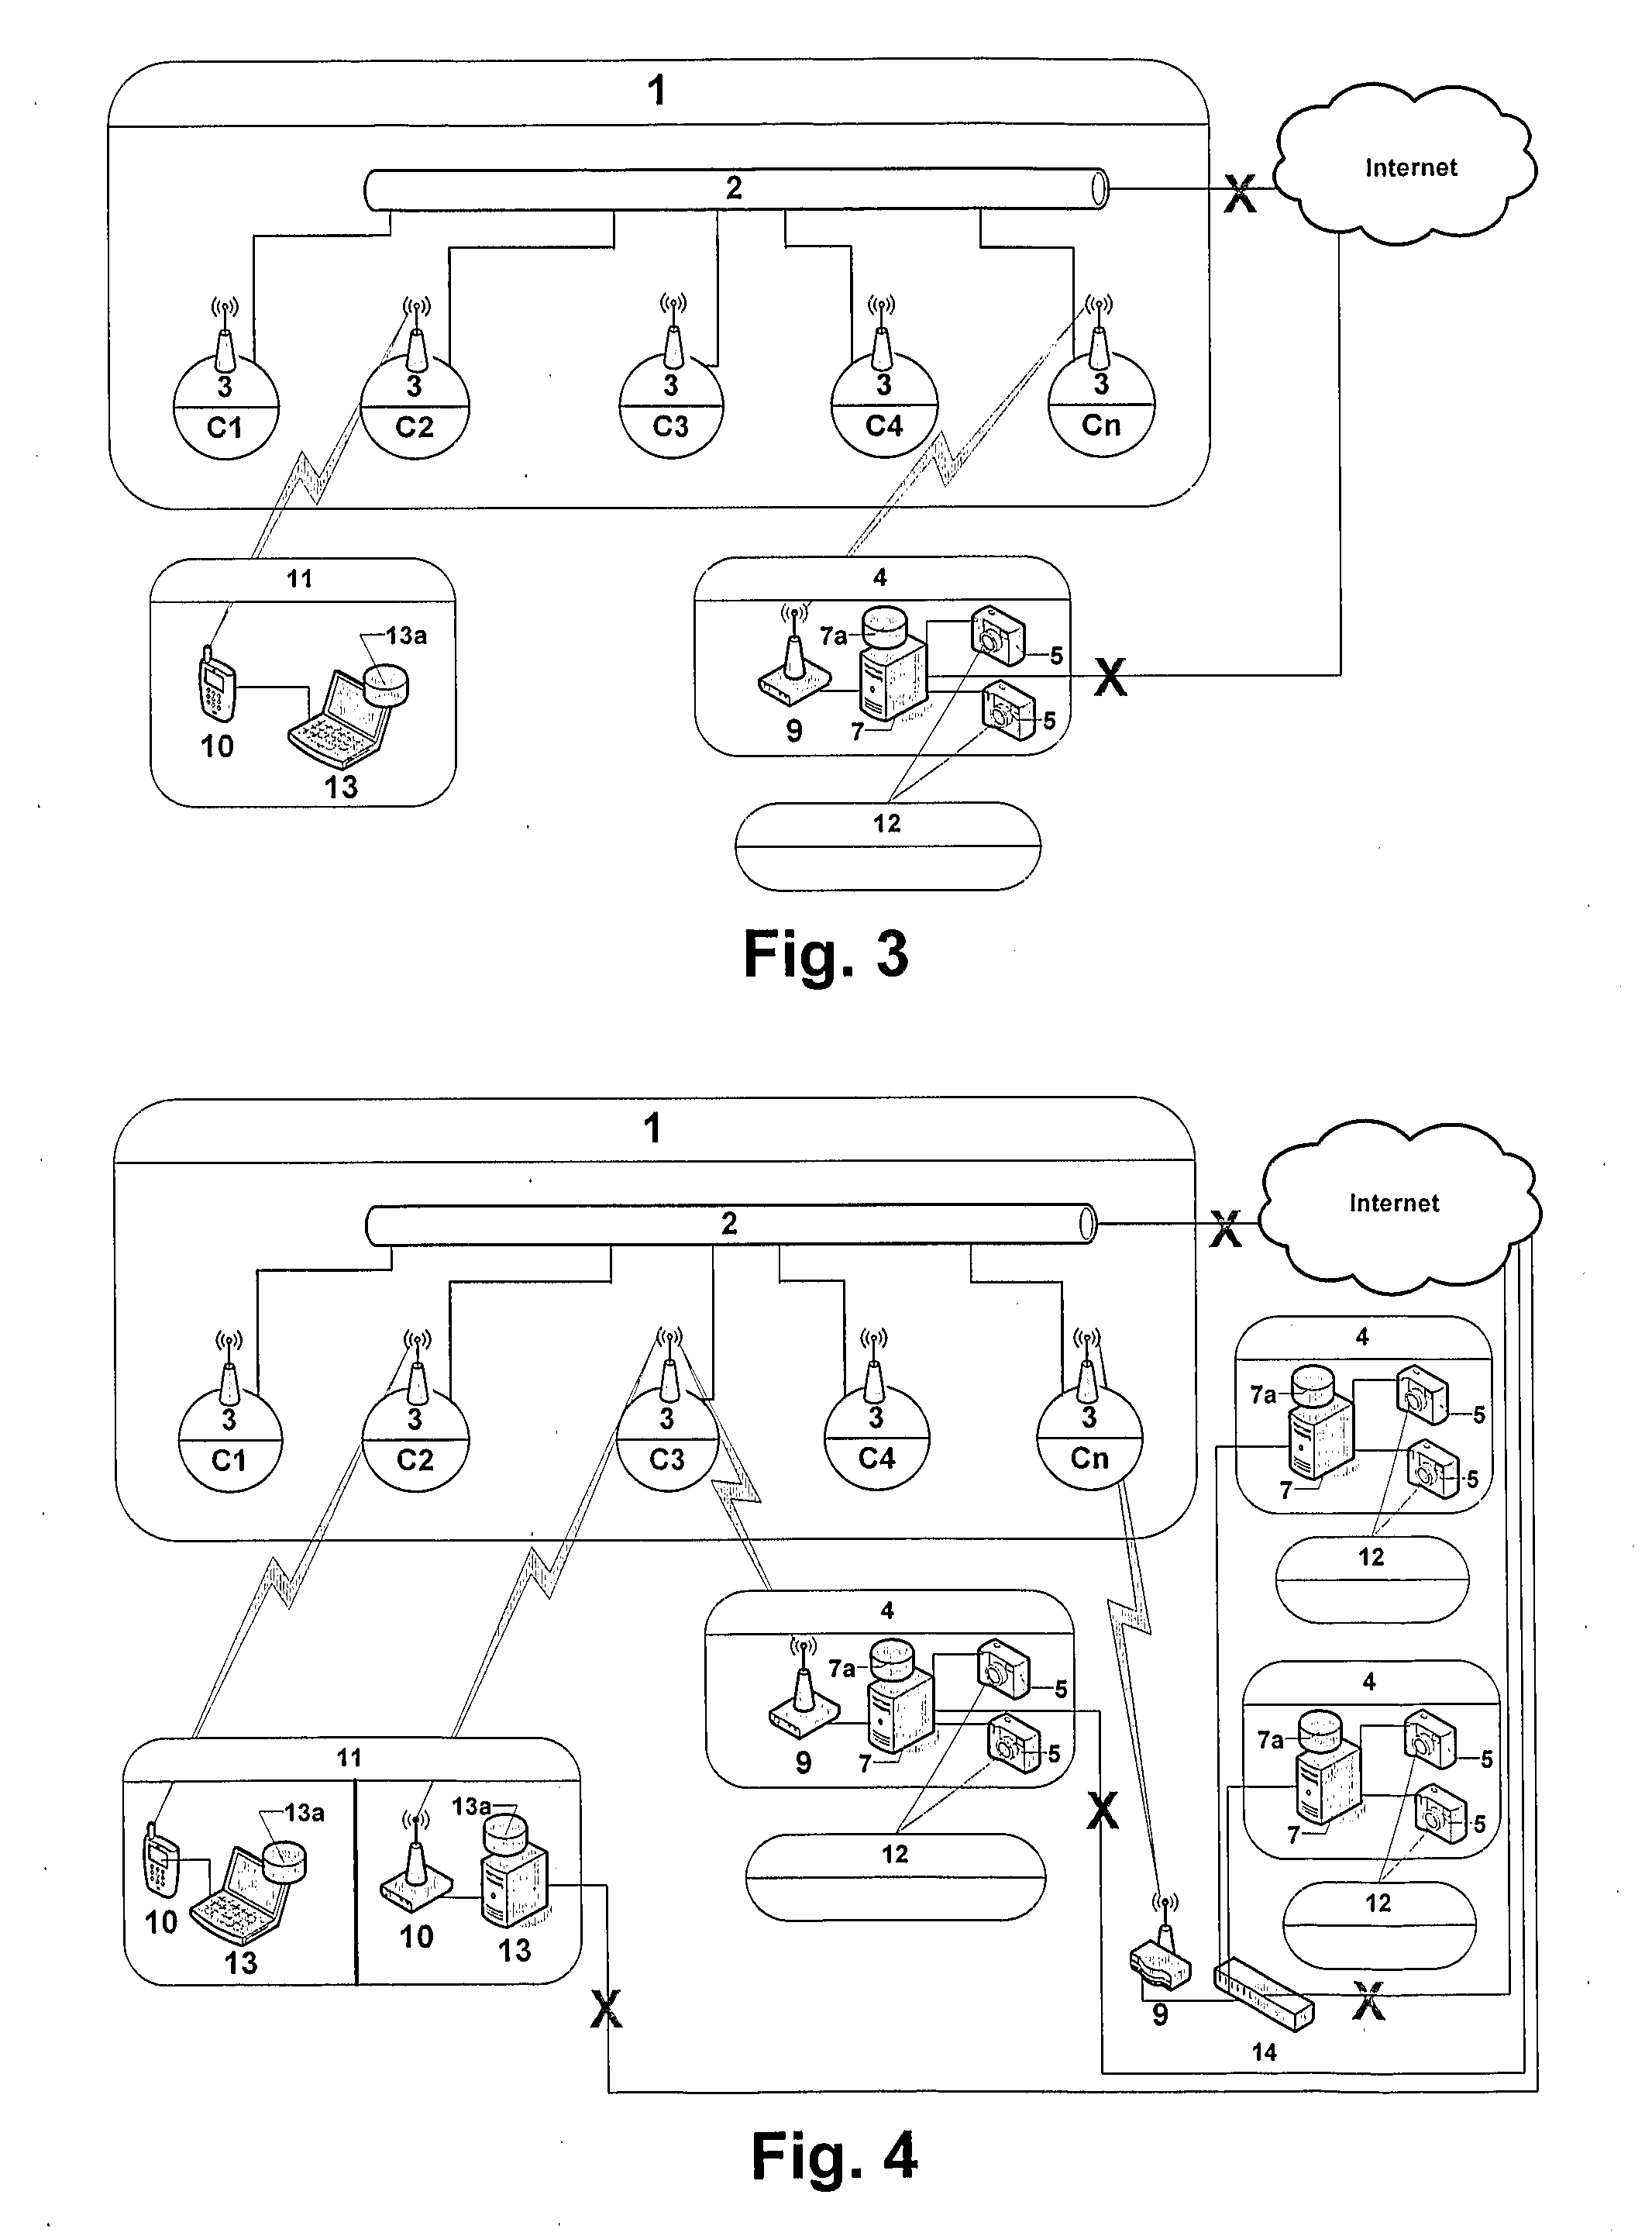 Mobile system and method for remote control and viewing